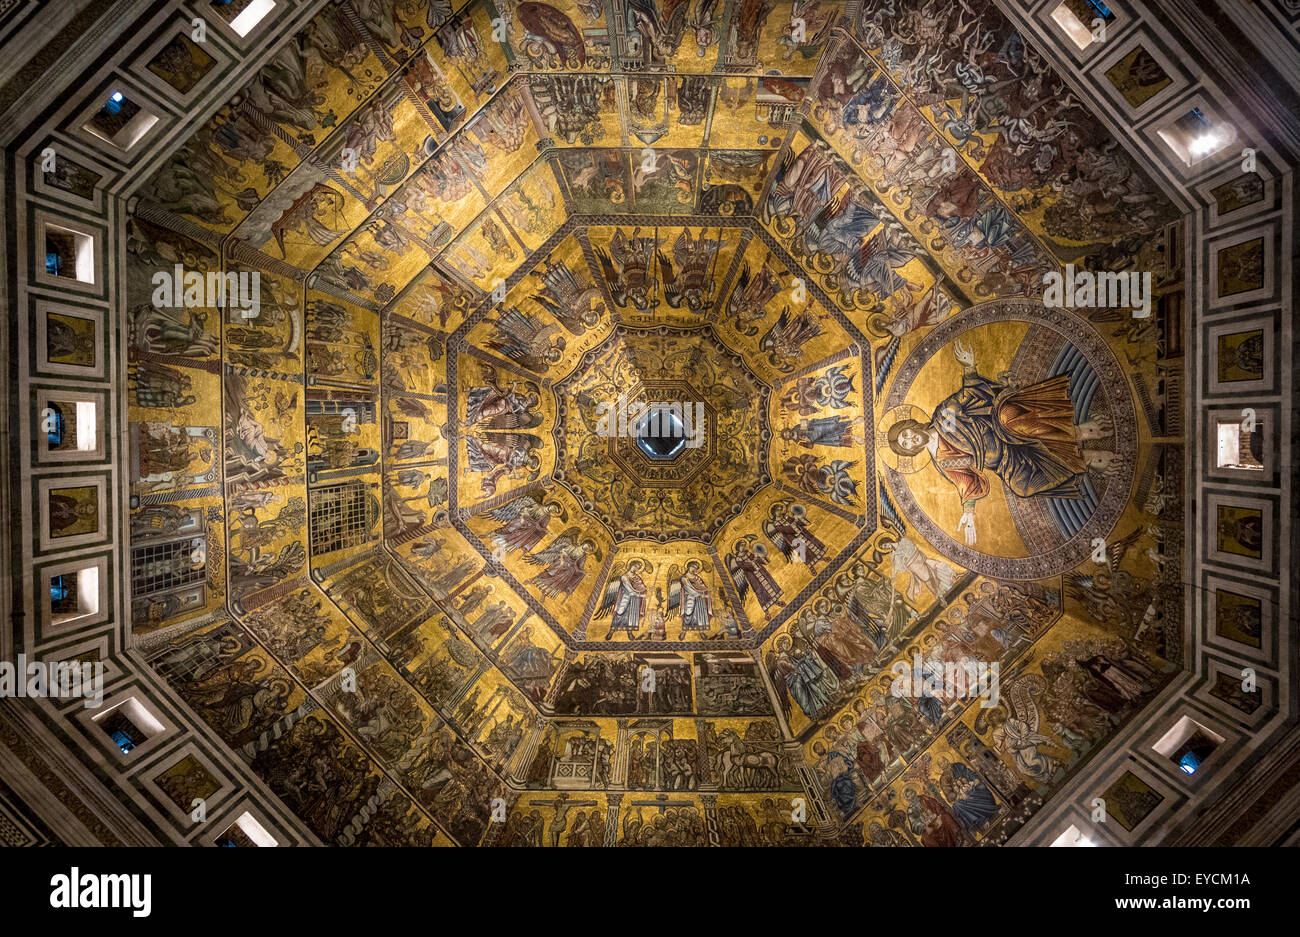 Mosaic ceiling of the Florence duomo  Baptistery Florence, Italy. Stock Photo